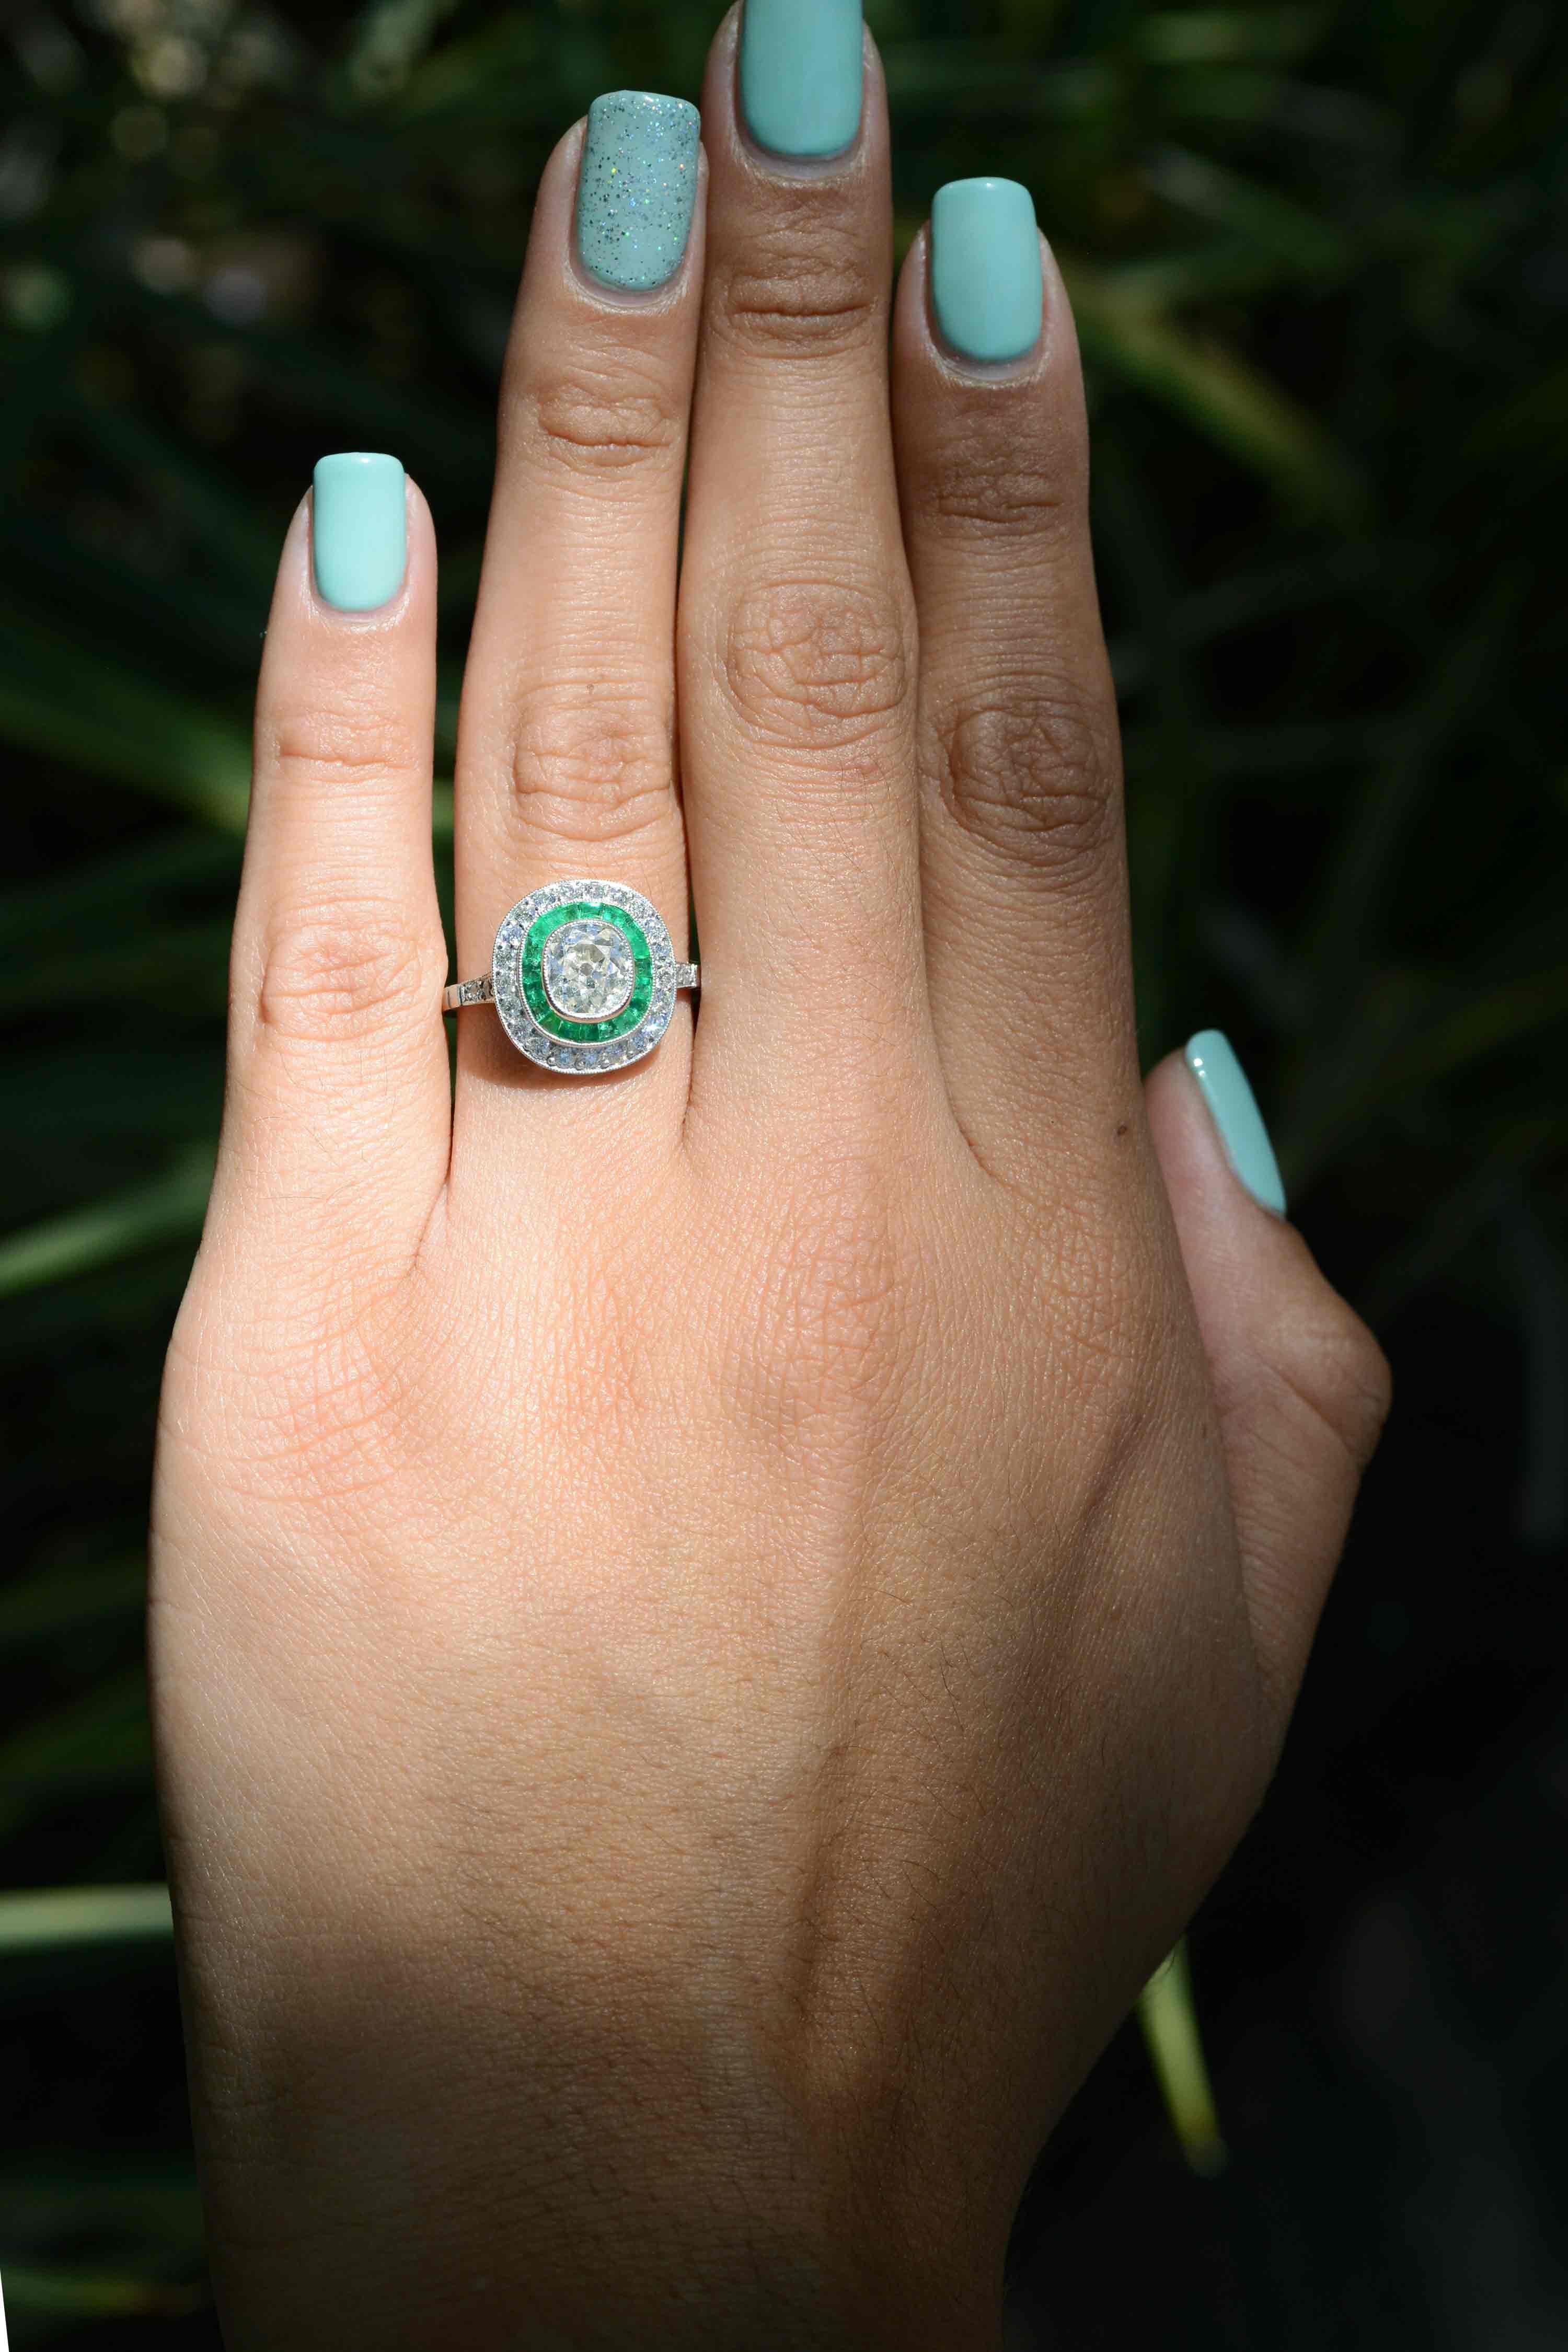 A magnificent antique old mine cushion cut diamond & emerald engagement ring headlining an exquisite double halo. The partition of perfectly matched French cut emeralds glow incredibly and are a standout element in this stunning piece. The center